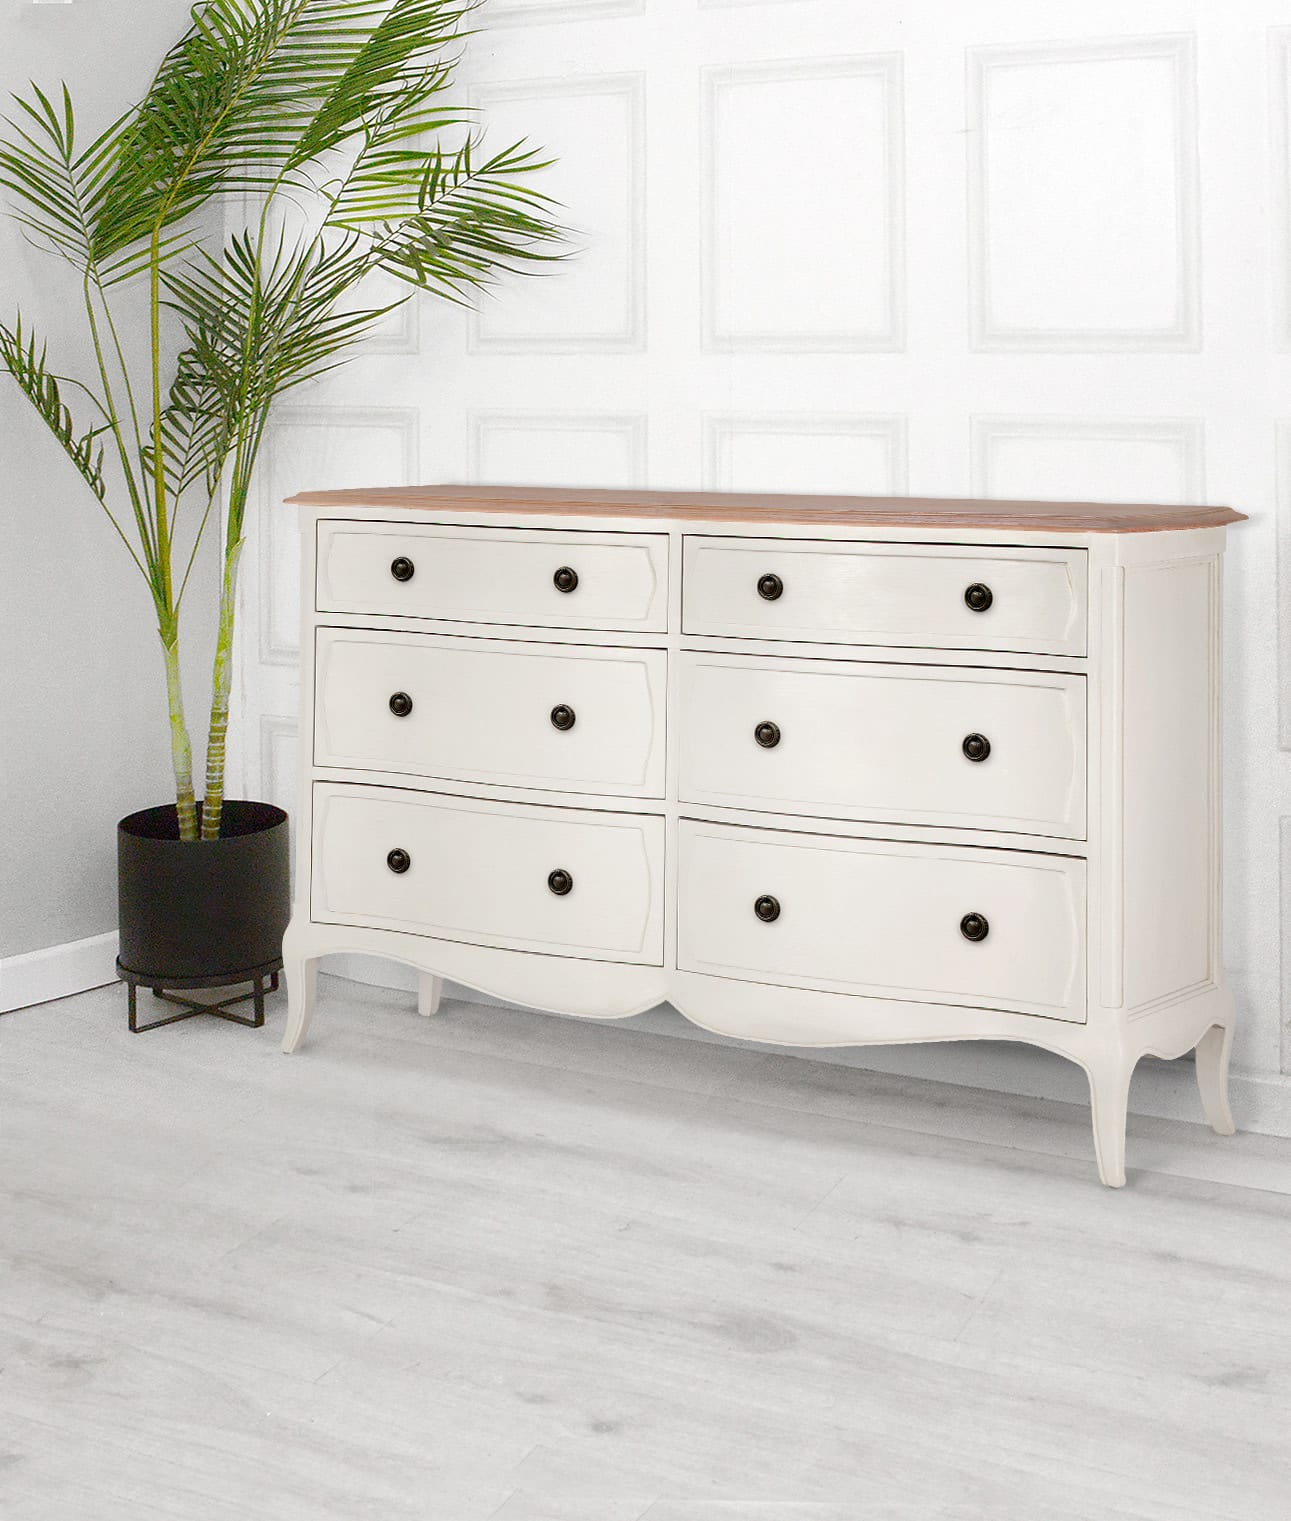 Amelie White 6 Drawer Chest of Drawers | Willis and Gambier